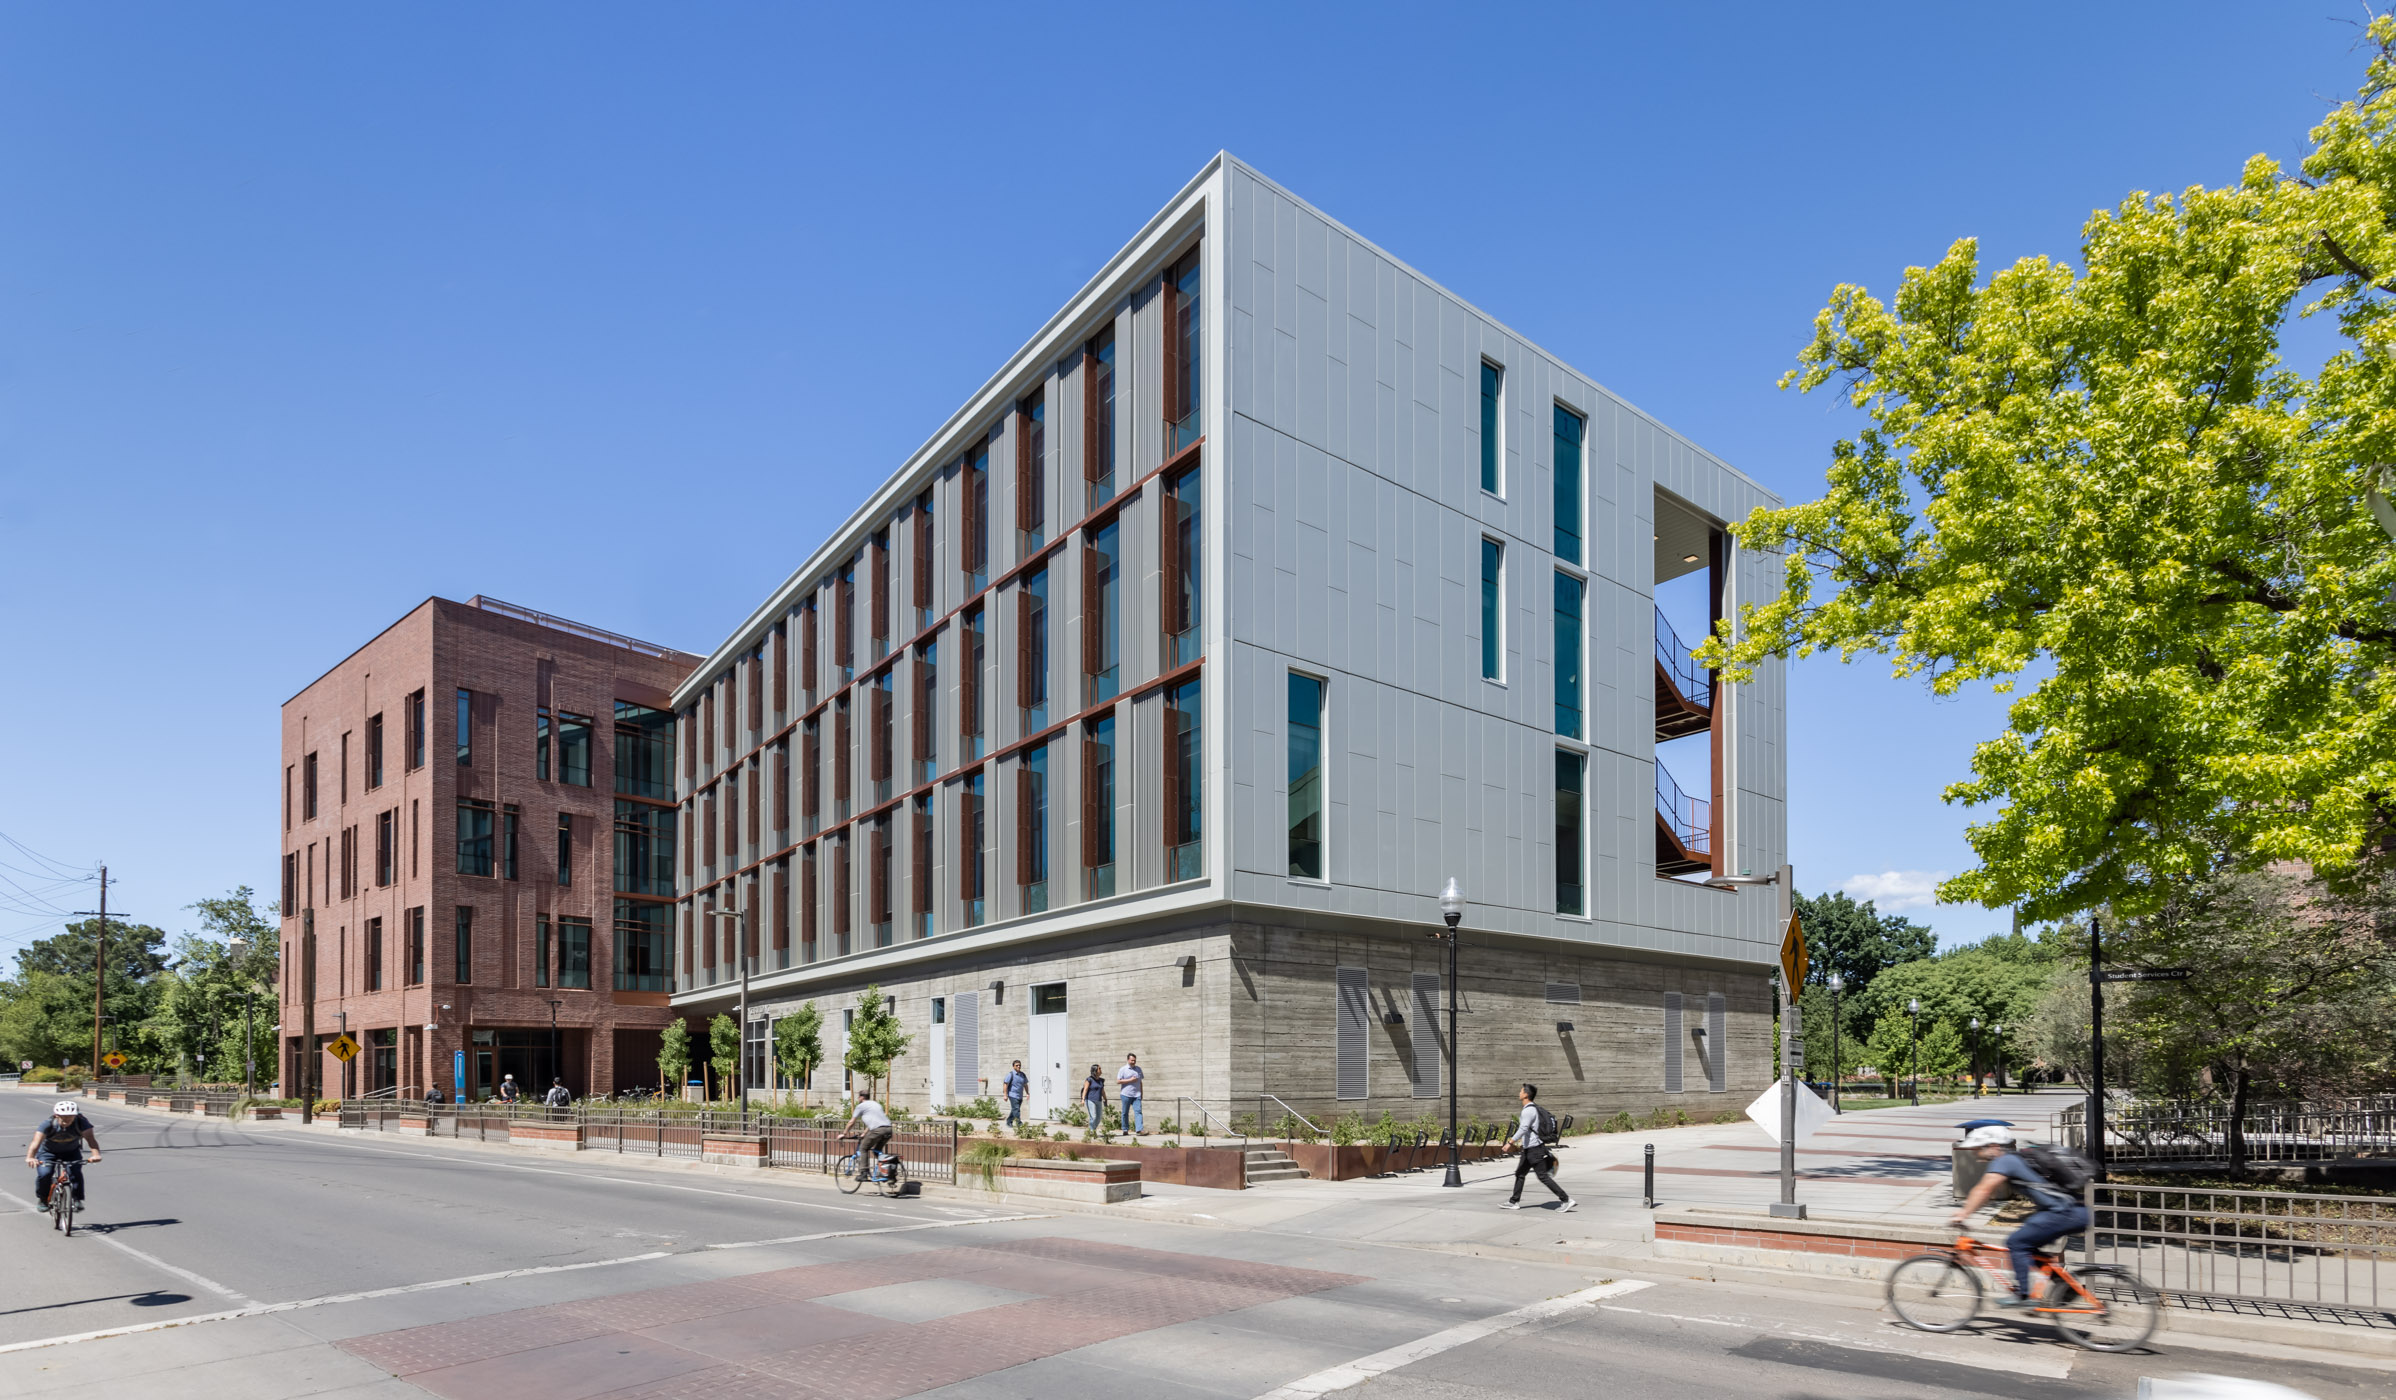 4-21_Smithgroup_ChicoState-3159-Edit-2_InstitutionsGallery